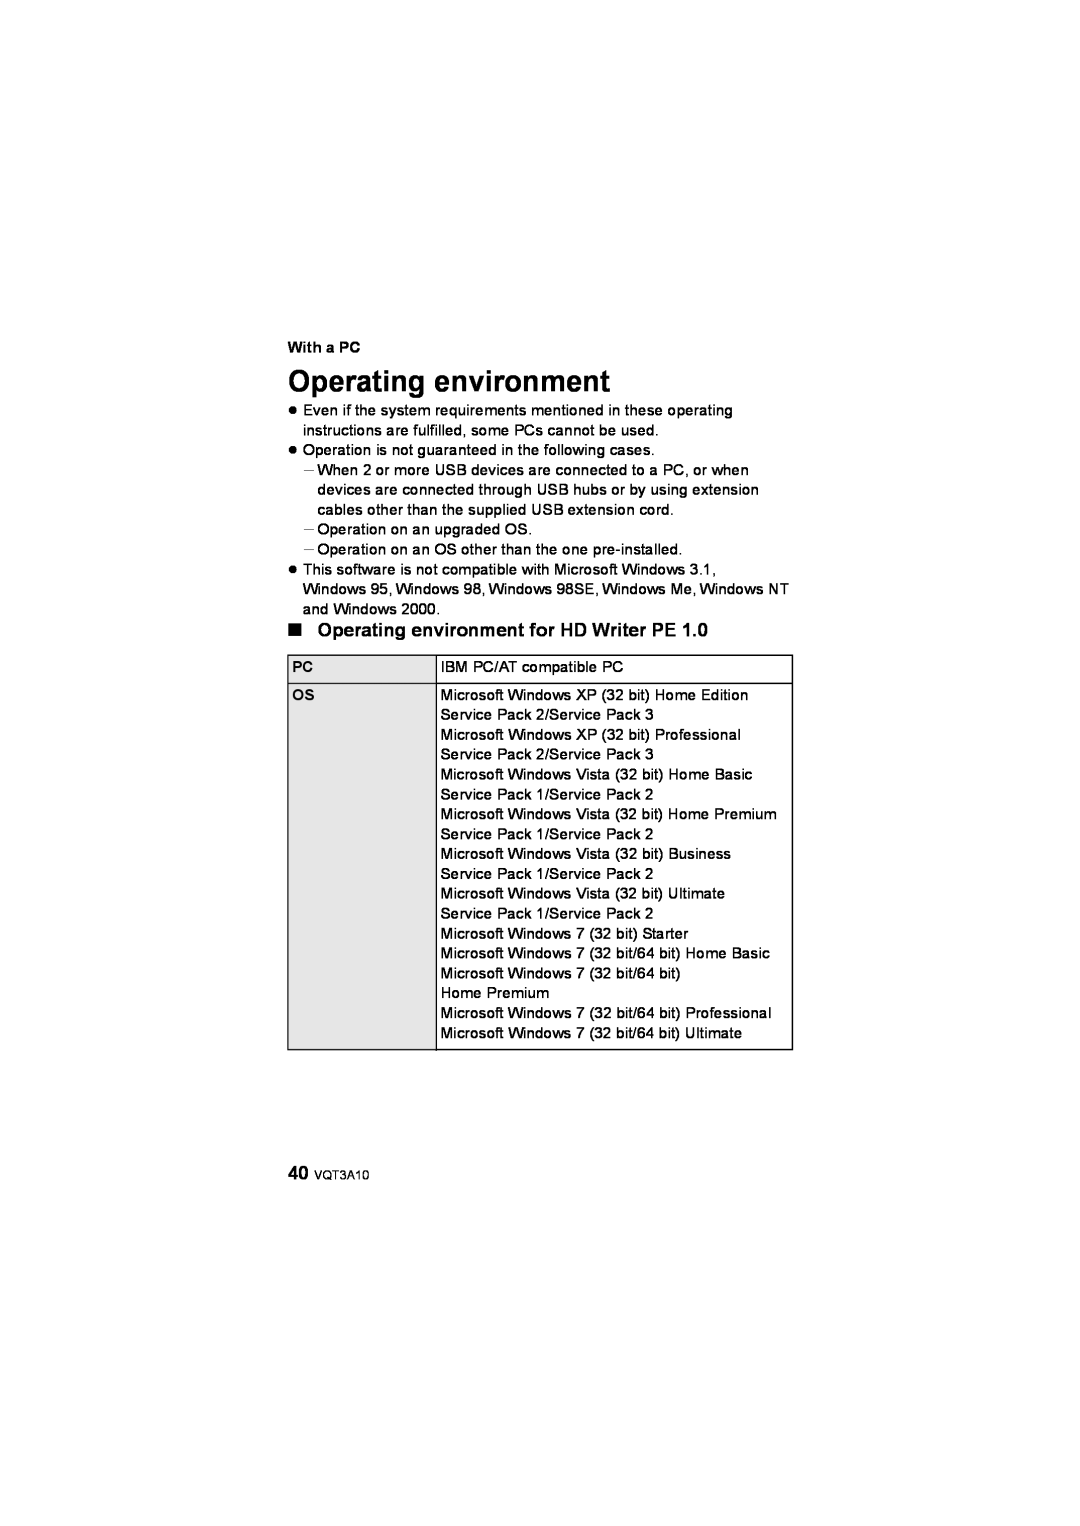 Panasonic HM-TA1 operating instructions ∫ Operating environment for HD Writer PE, With a PC 